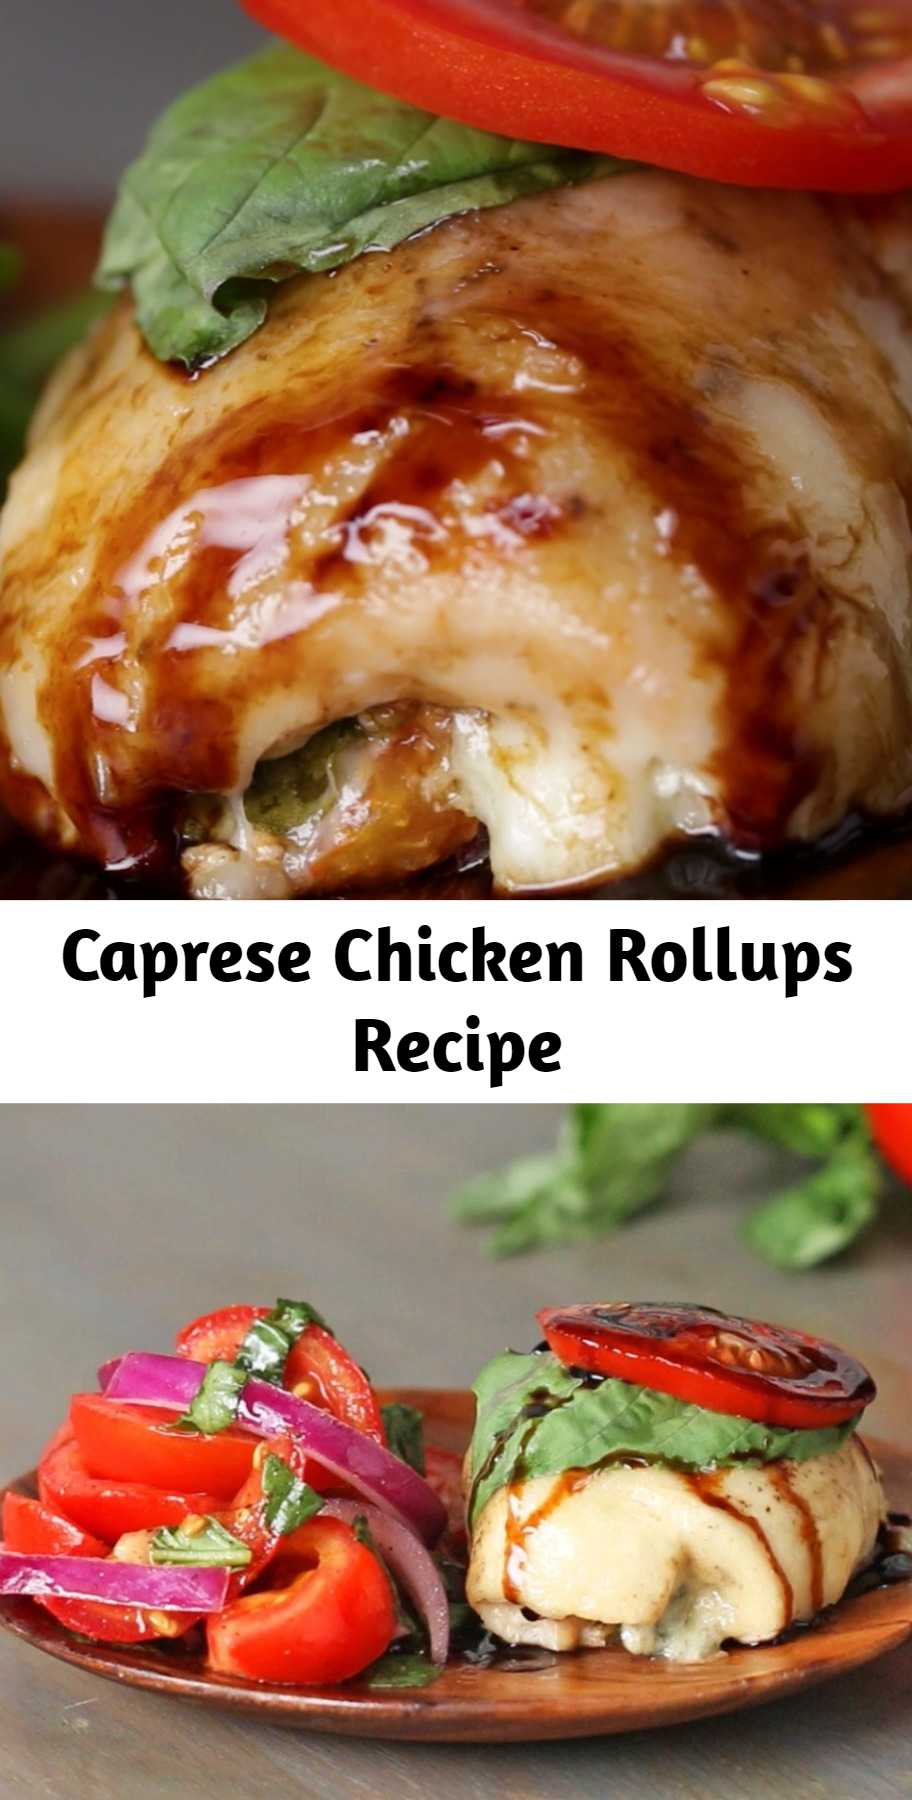 Caprese Chicken Rollups Recipe - Looking for a new way to enjoy caprese salad? Try these Caprese Chicken Rollups! You get all the fun of a caprese salad stuffed into chicken breast! It was really good!